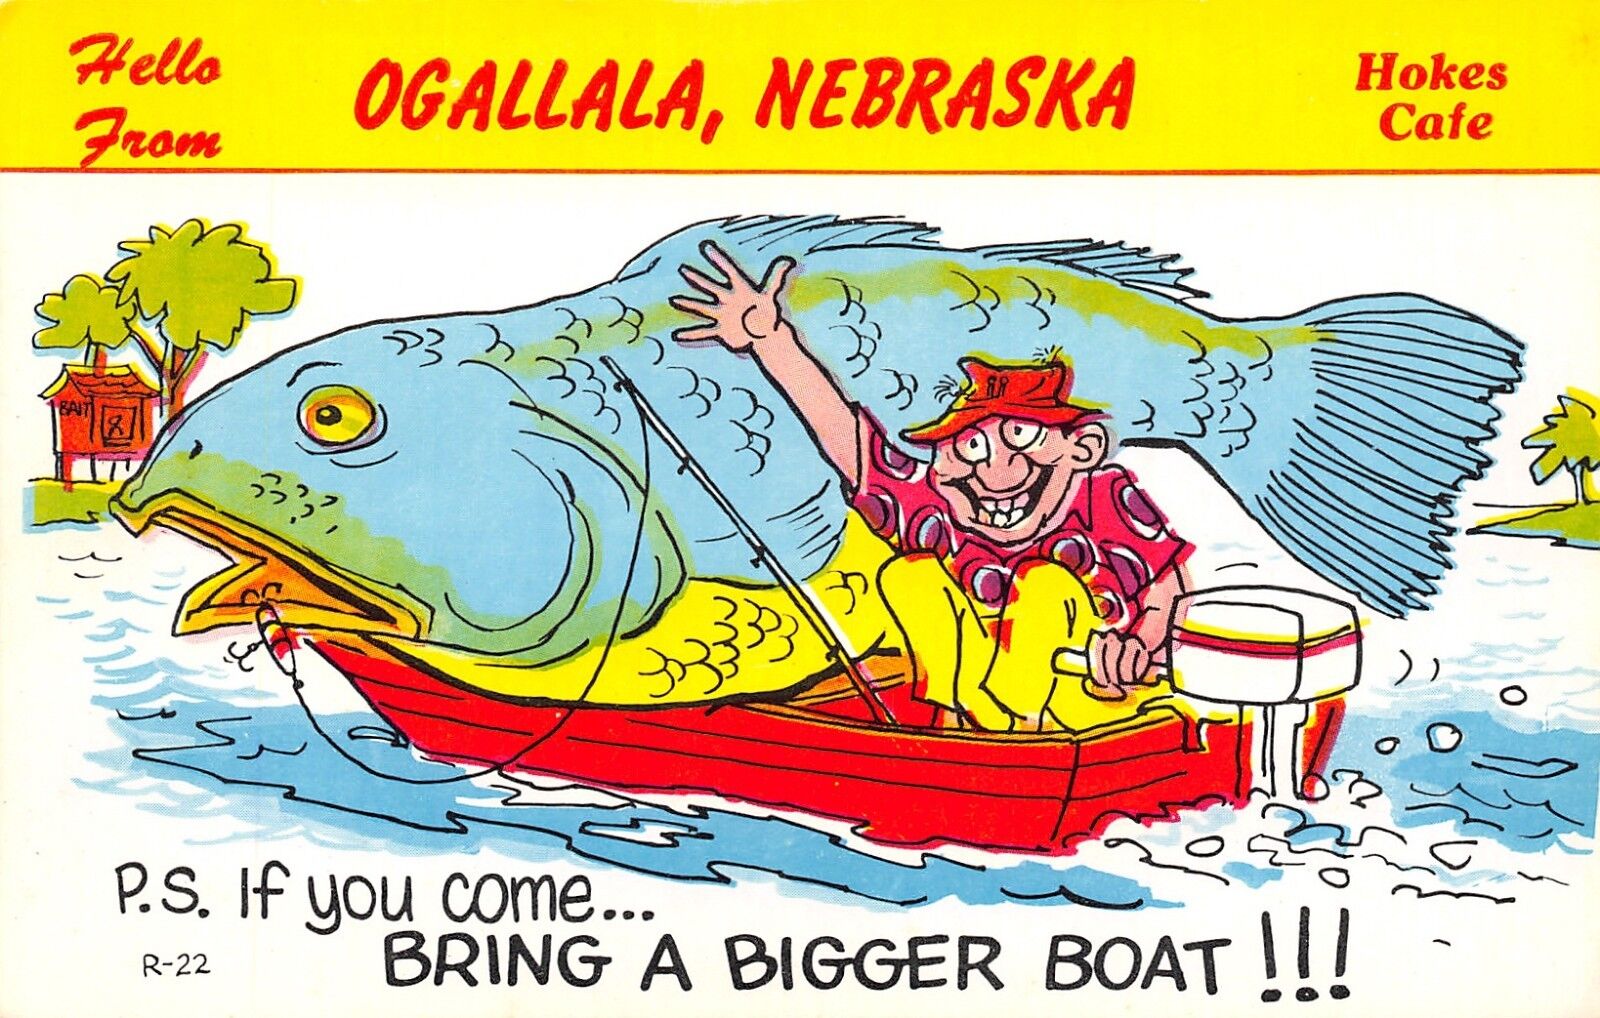 Ogallala NE Hokes Cafe~If You Come, Bring a Bigger Boat~Exaggerated Fish 1950s